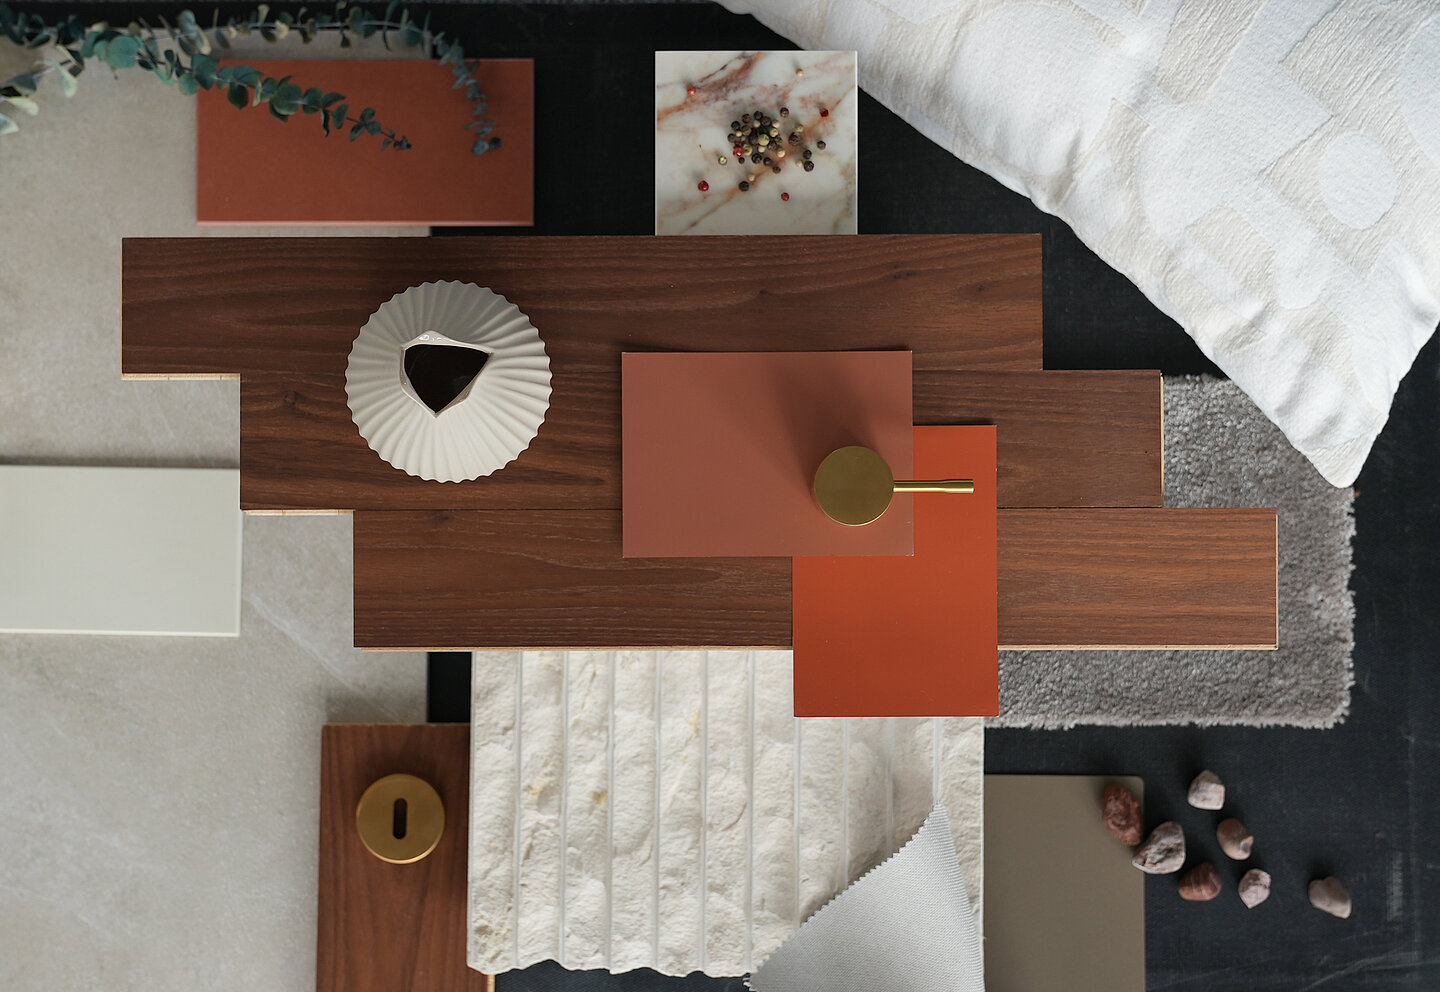 A potpourri of different materials and colors from which a design concept is created.